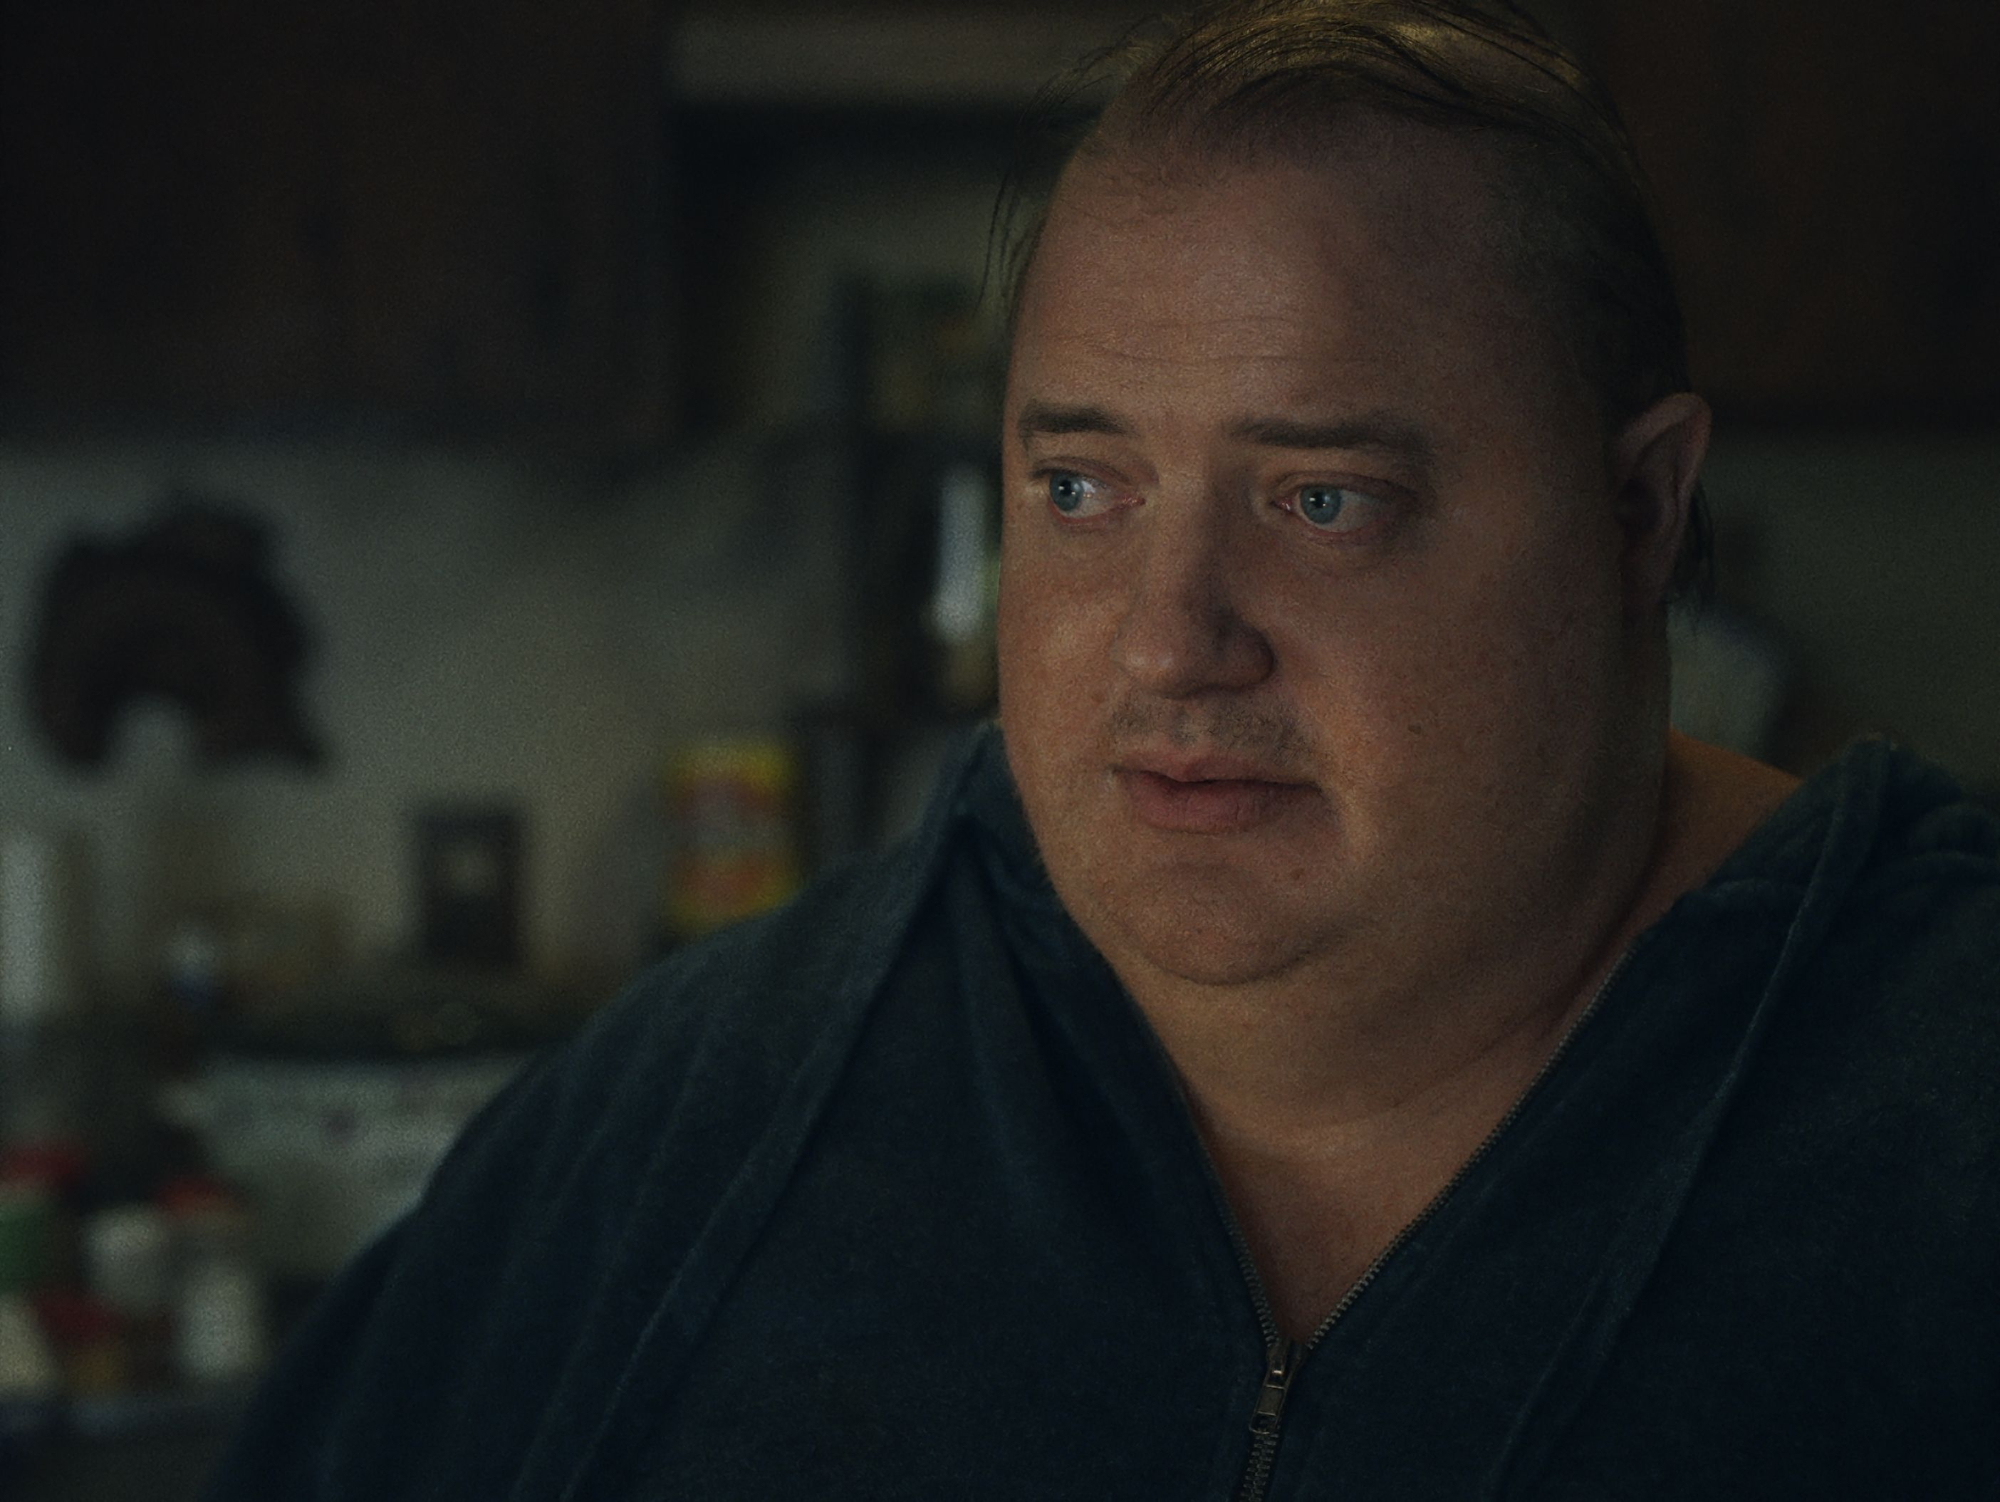 'The Whale' Brendan Fraser as Charlie looking straight ahead standing in the kitchen wearing a hoodie